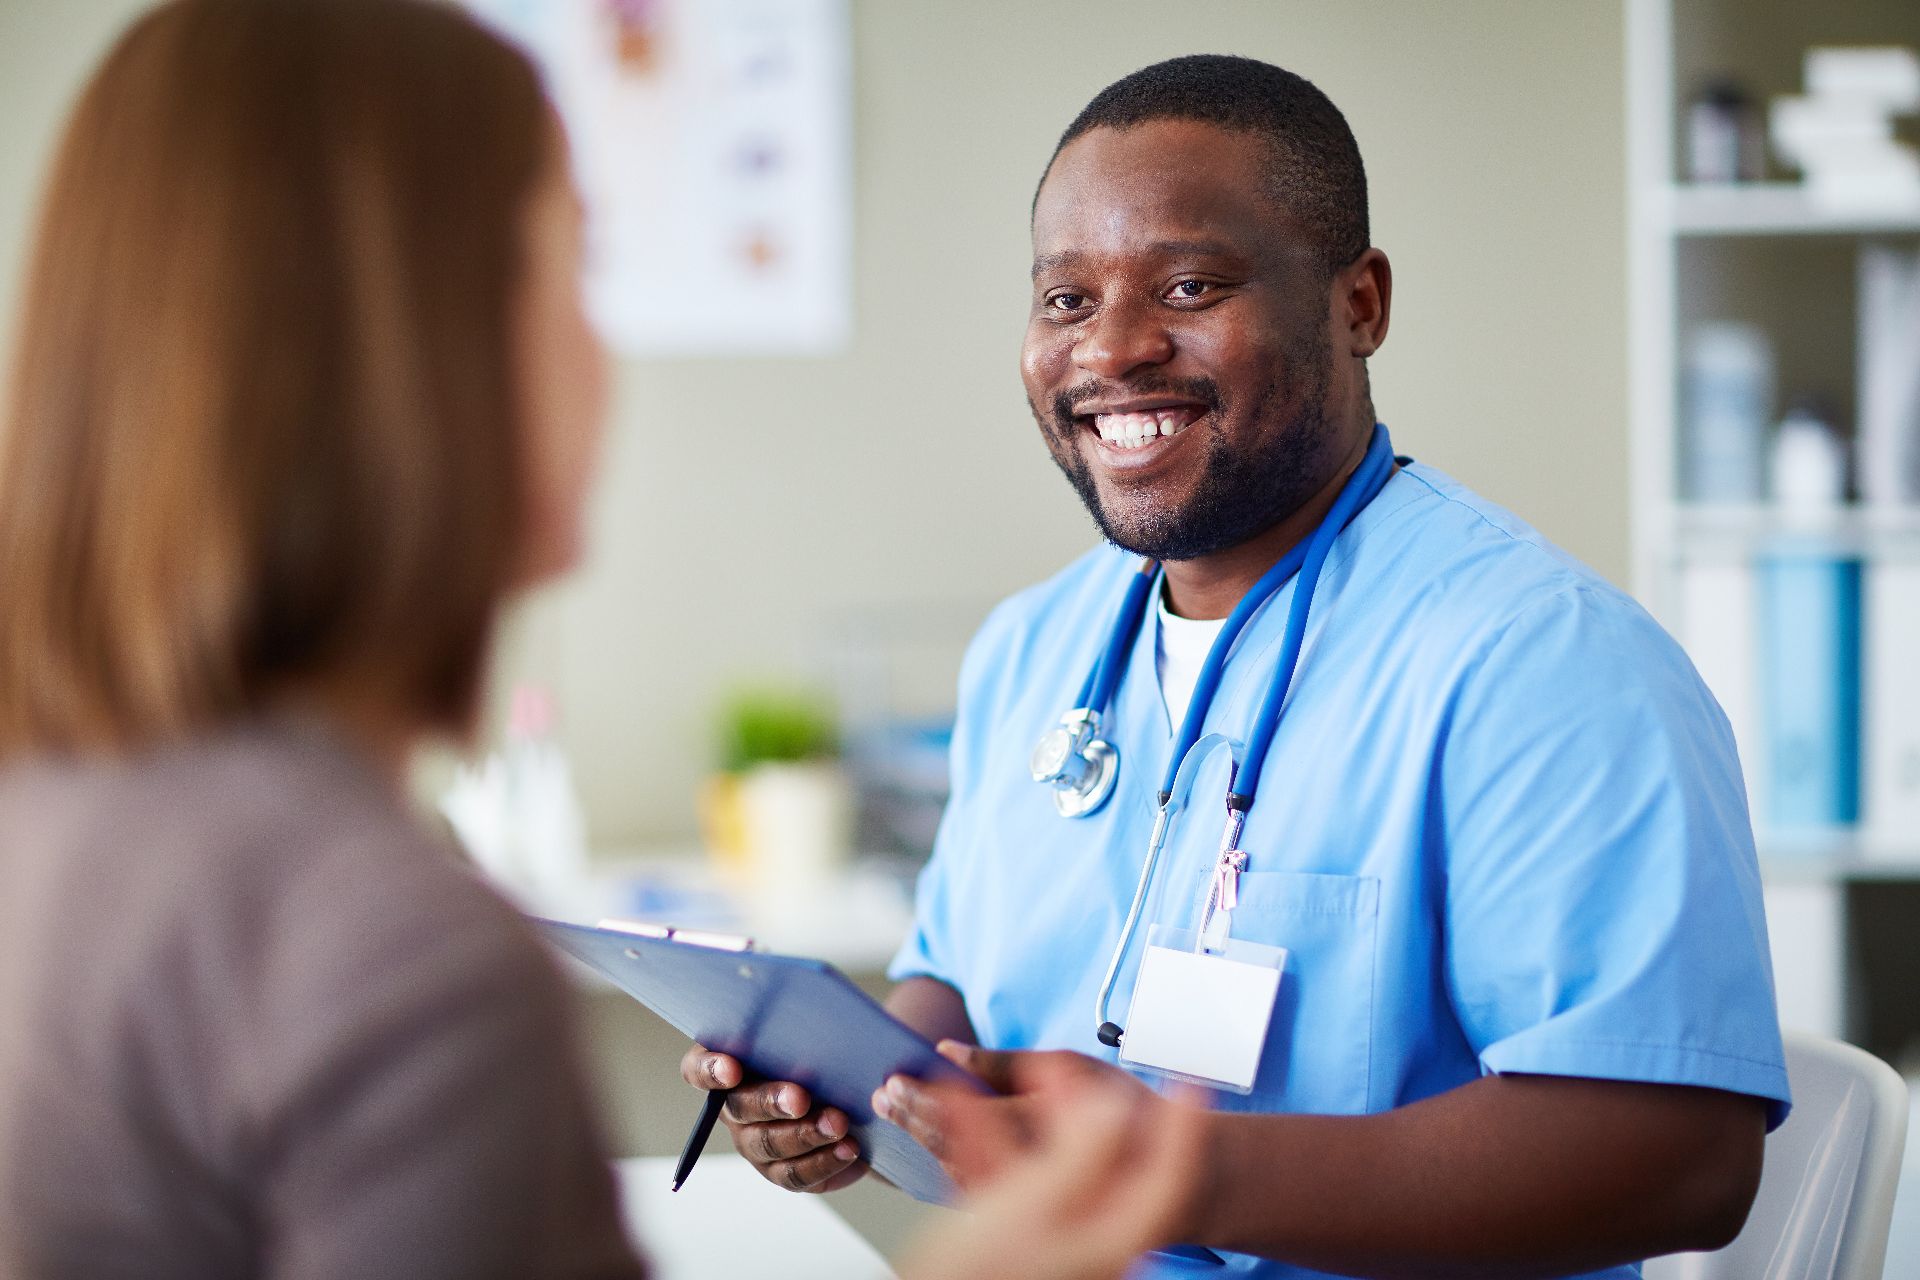 Banner image of man in scrubs smiling at patient